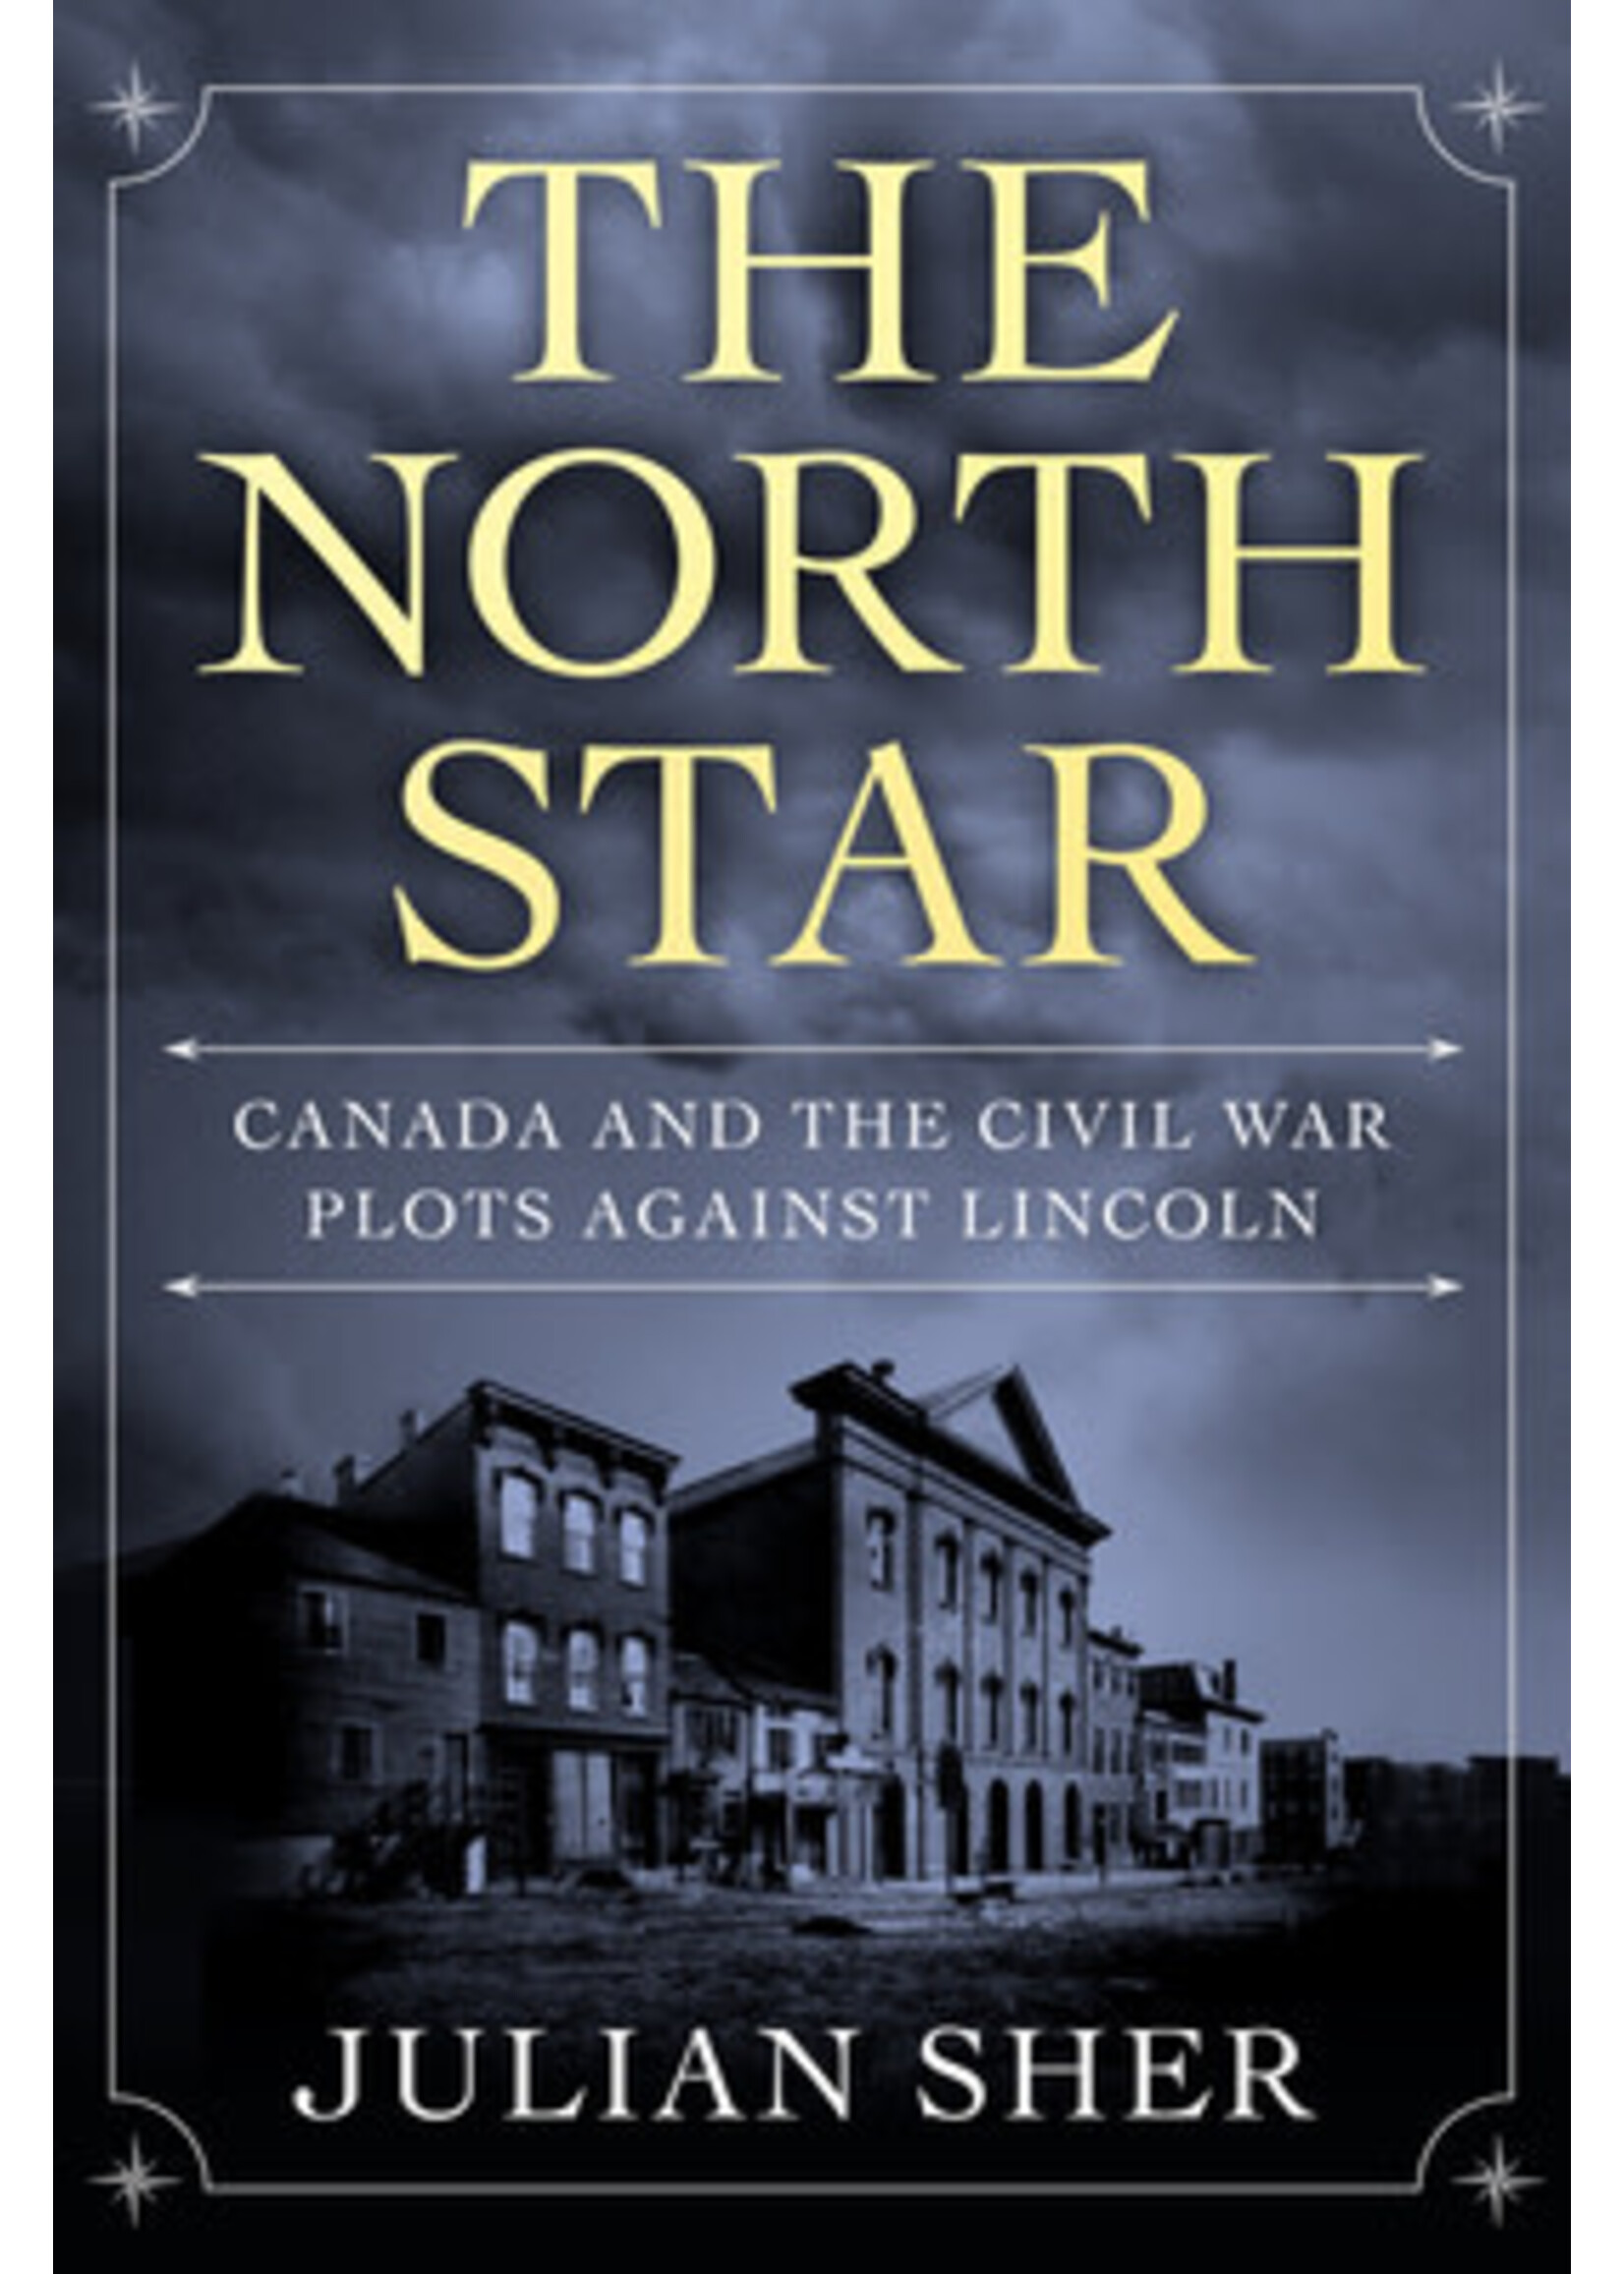 The North Star: Canada and the Civil War Plots Against Lincoln by Julian Sher